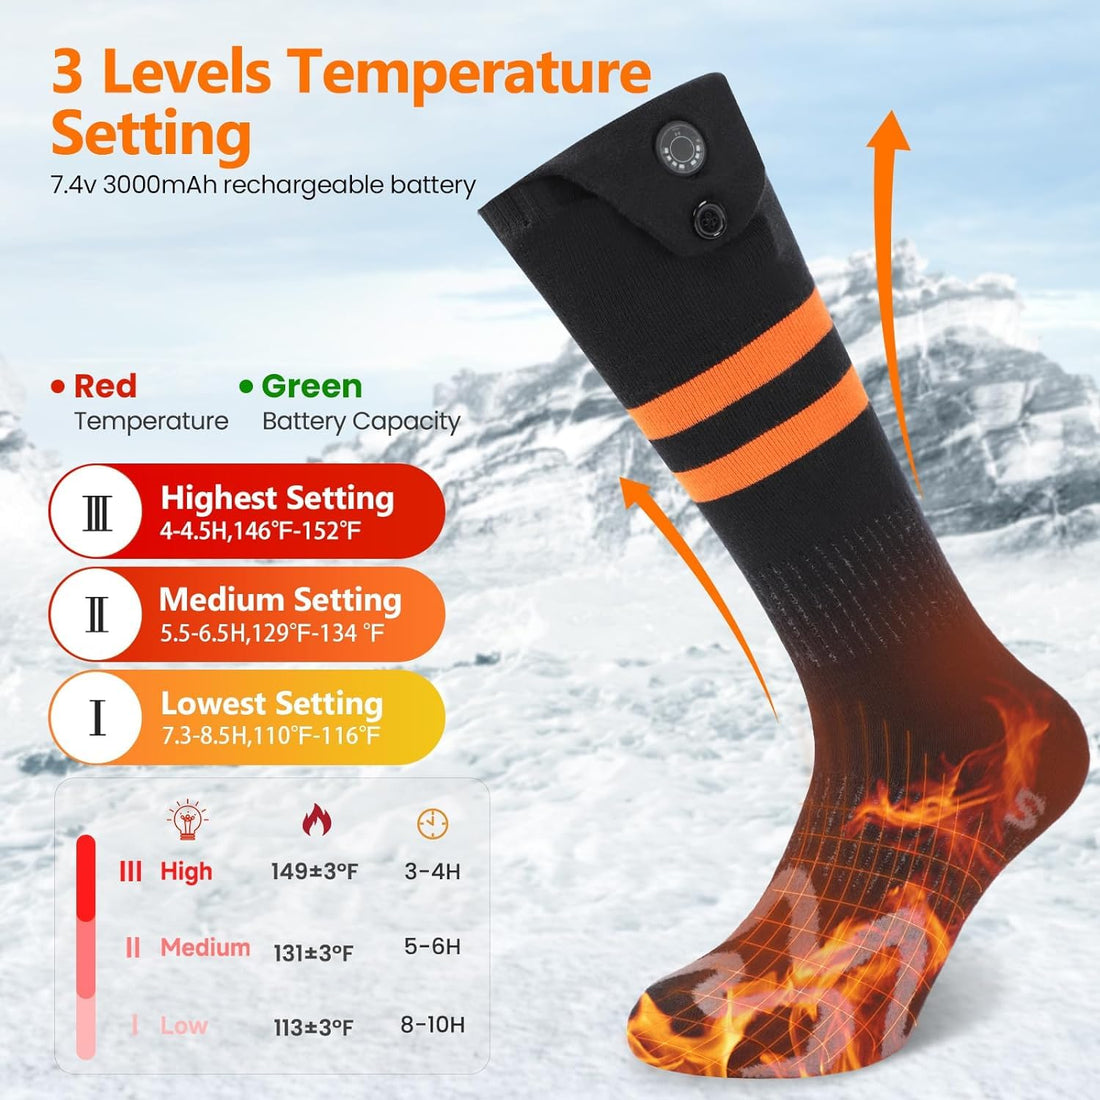 Heated Socks, Rechargeable Heated Socks for Men Women, 7.4V 3000mAh Battery Powered Electric Socks with APP Control 3 Heating Levels Foot Warmer for Winter Outdoor Sports Hunting Skiing Camping Hiking